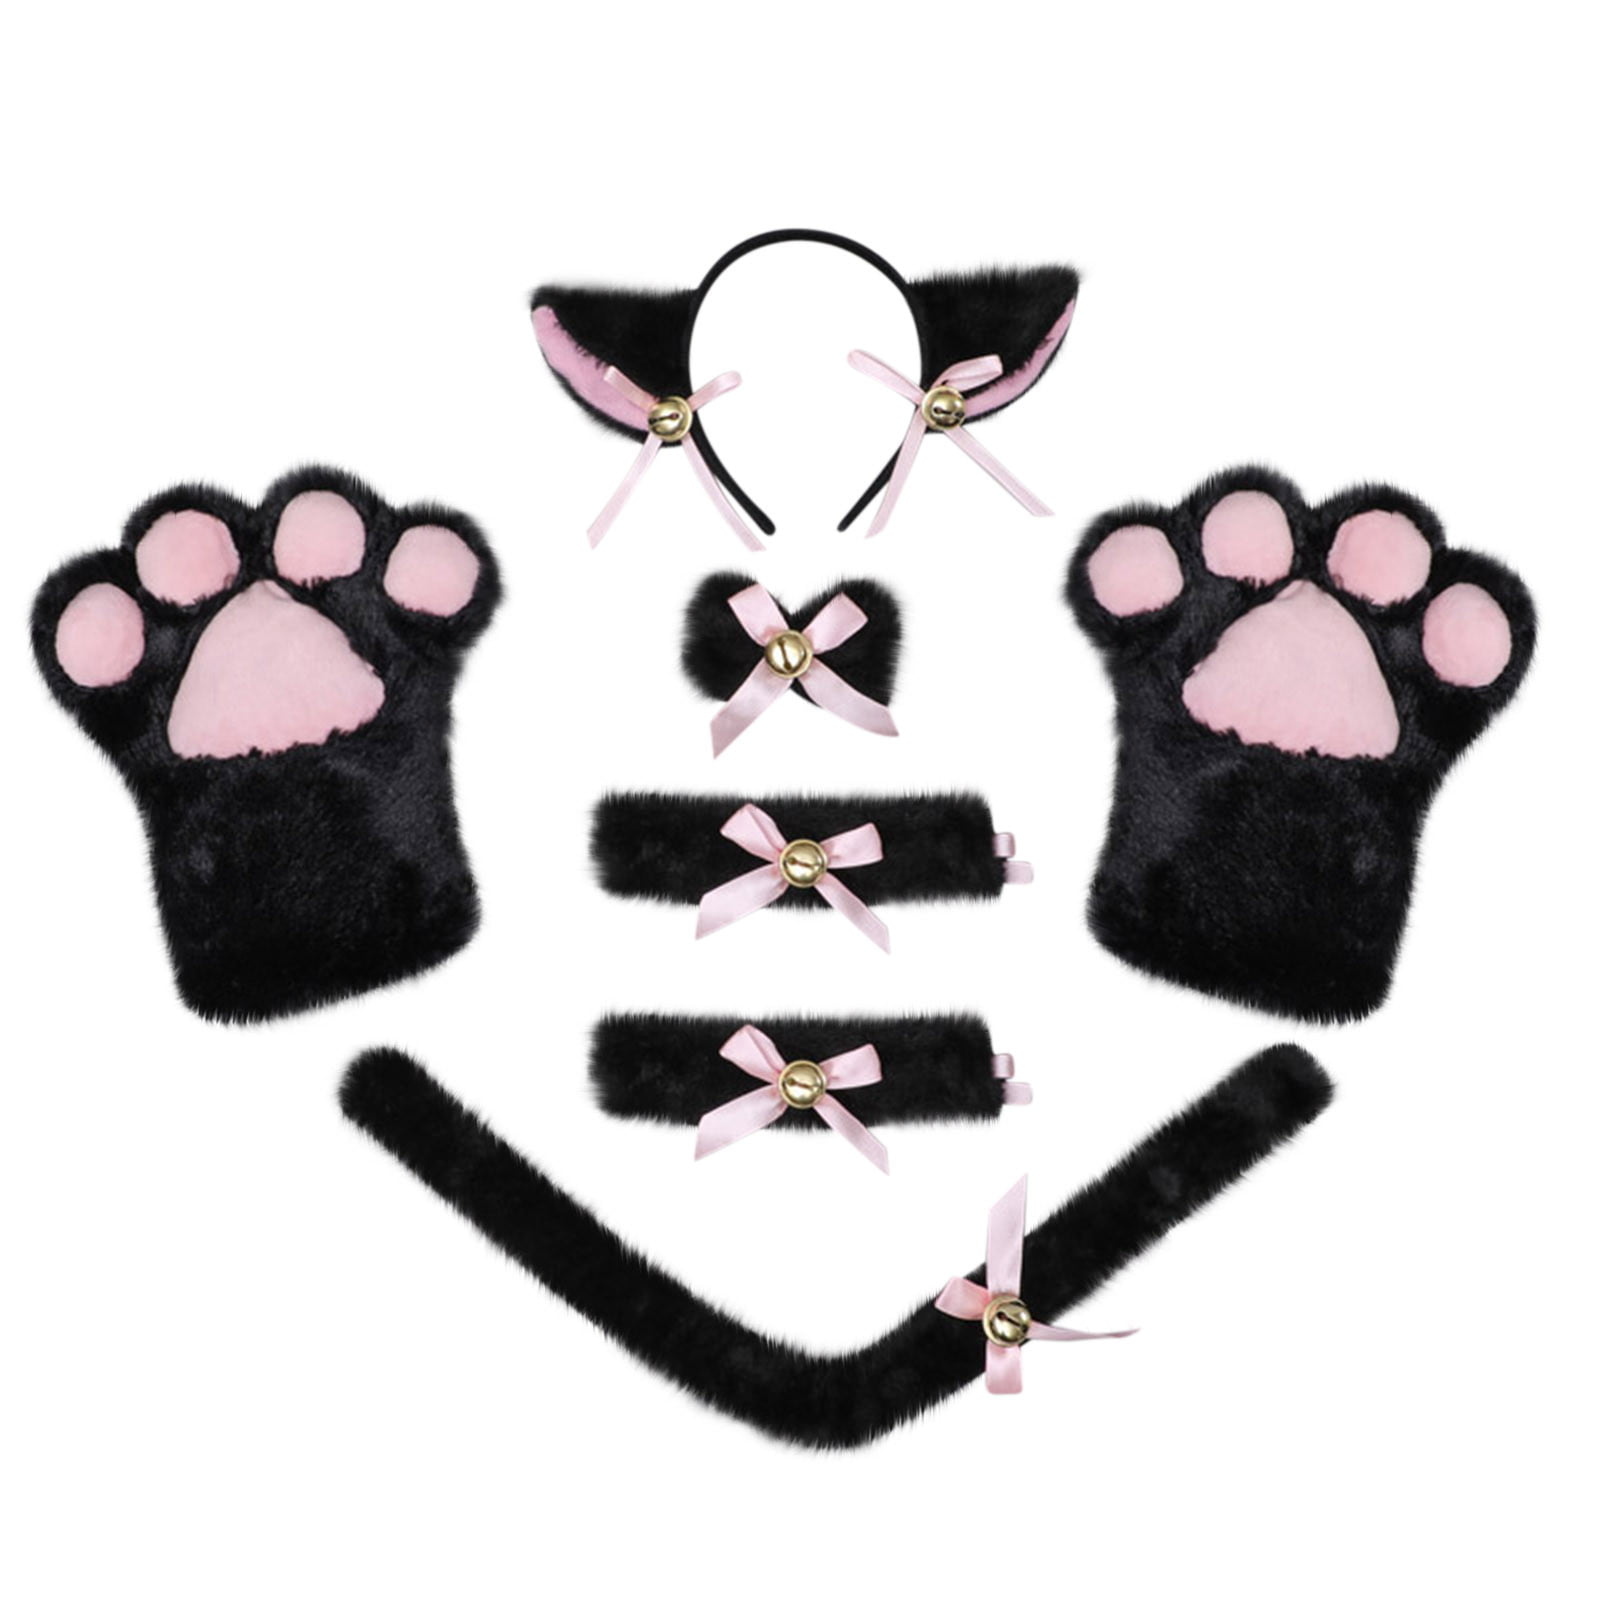 Bright Pink Sheep Ears And Stubby Tail Set Handmade Fancy Dress Unique Item